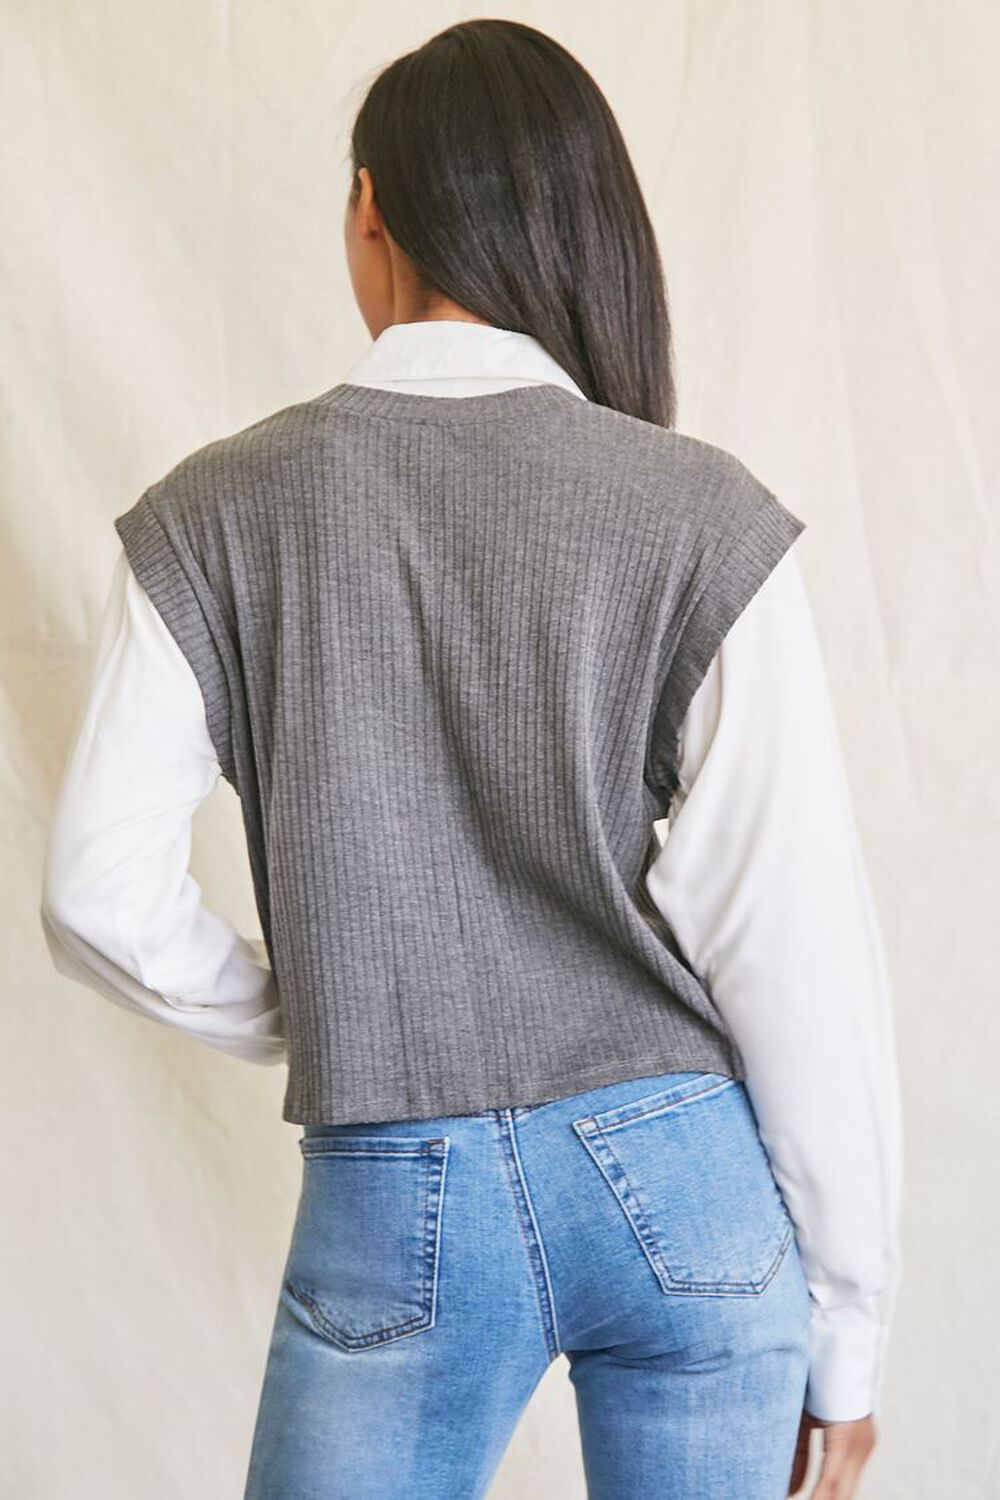 CHARCOAL/WHITE Sweater Vest & Shirt Combo Top, image 3